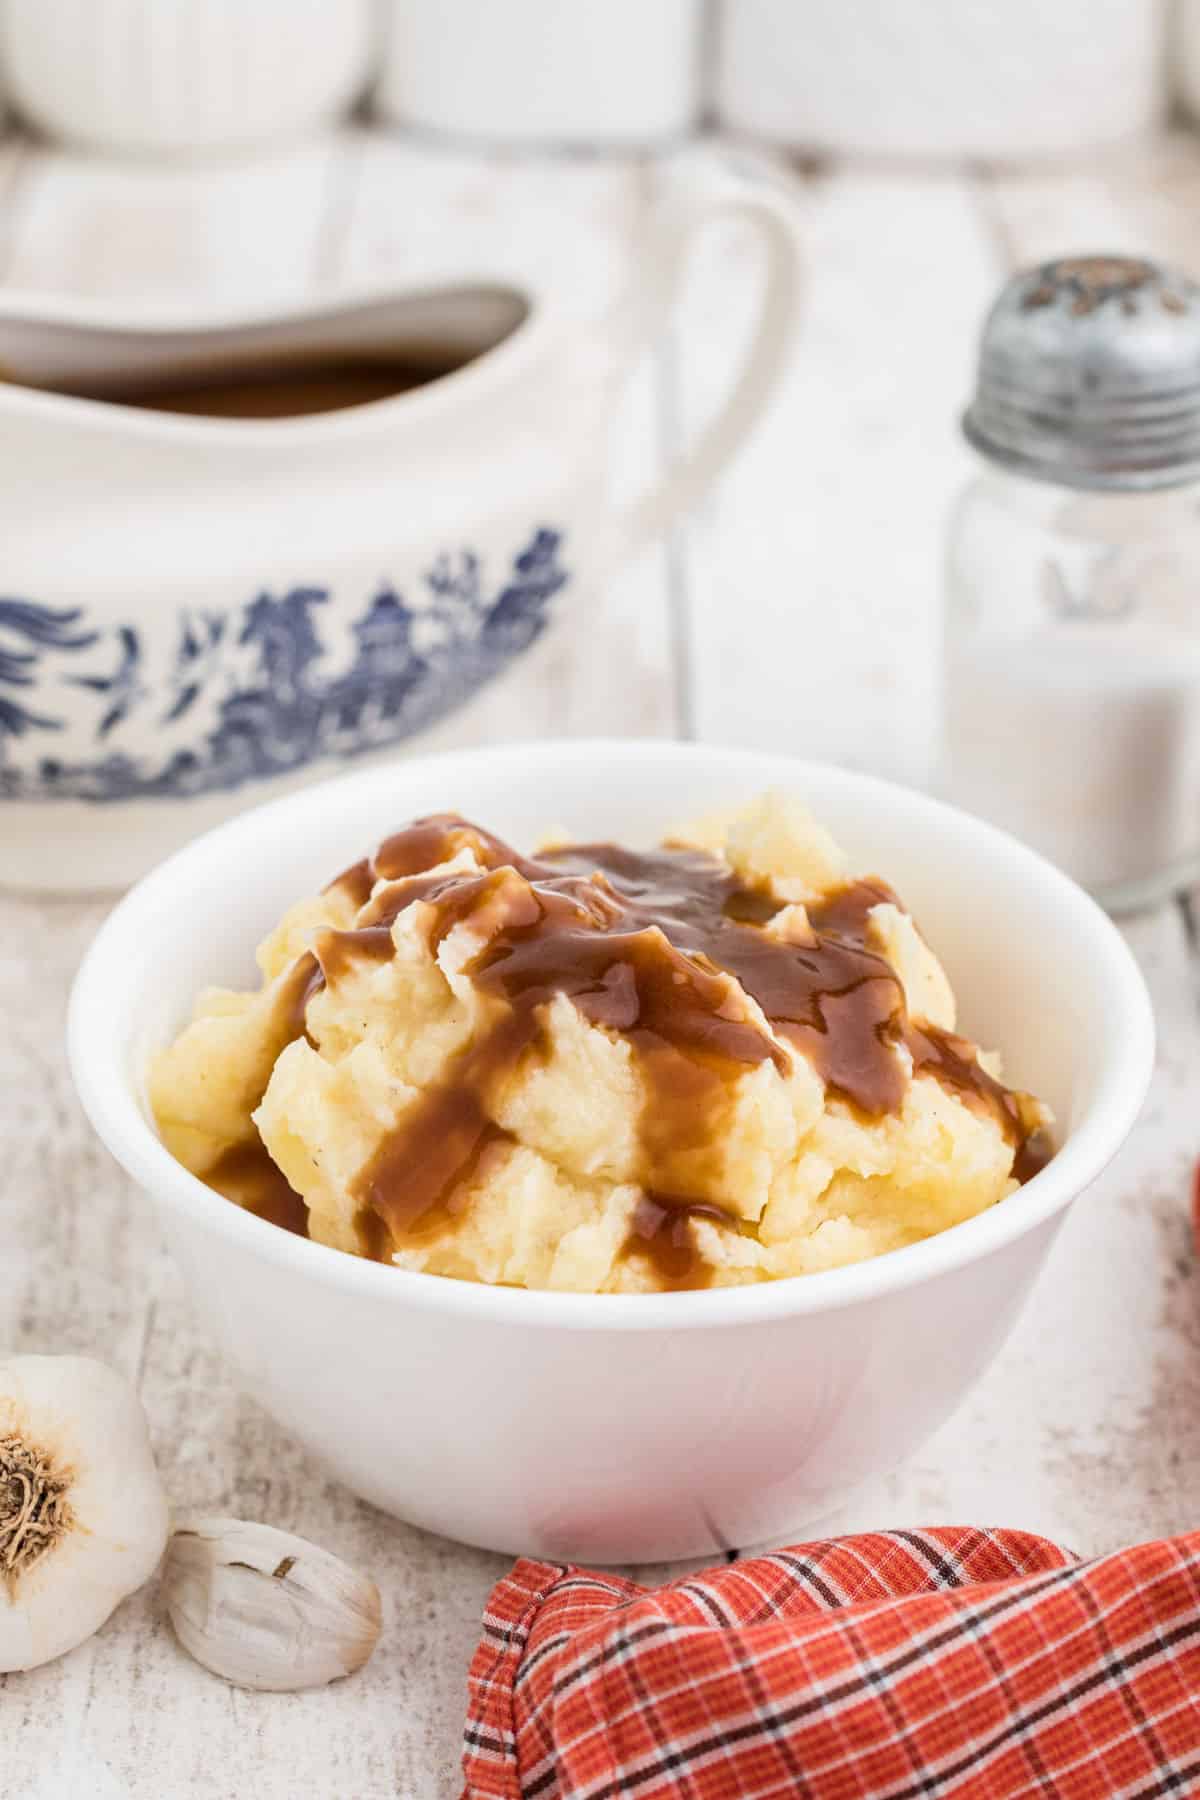 A bowl of mashed potatoes with gravy poured on top.